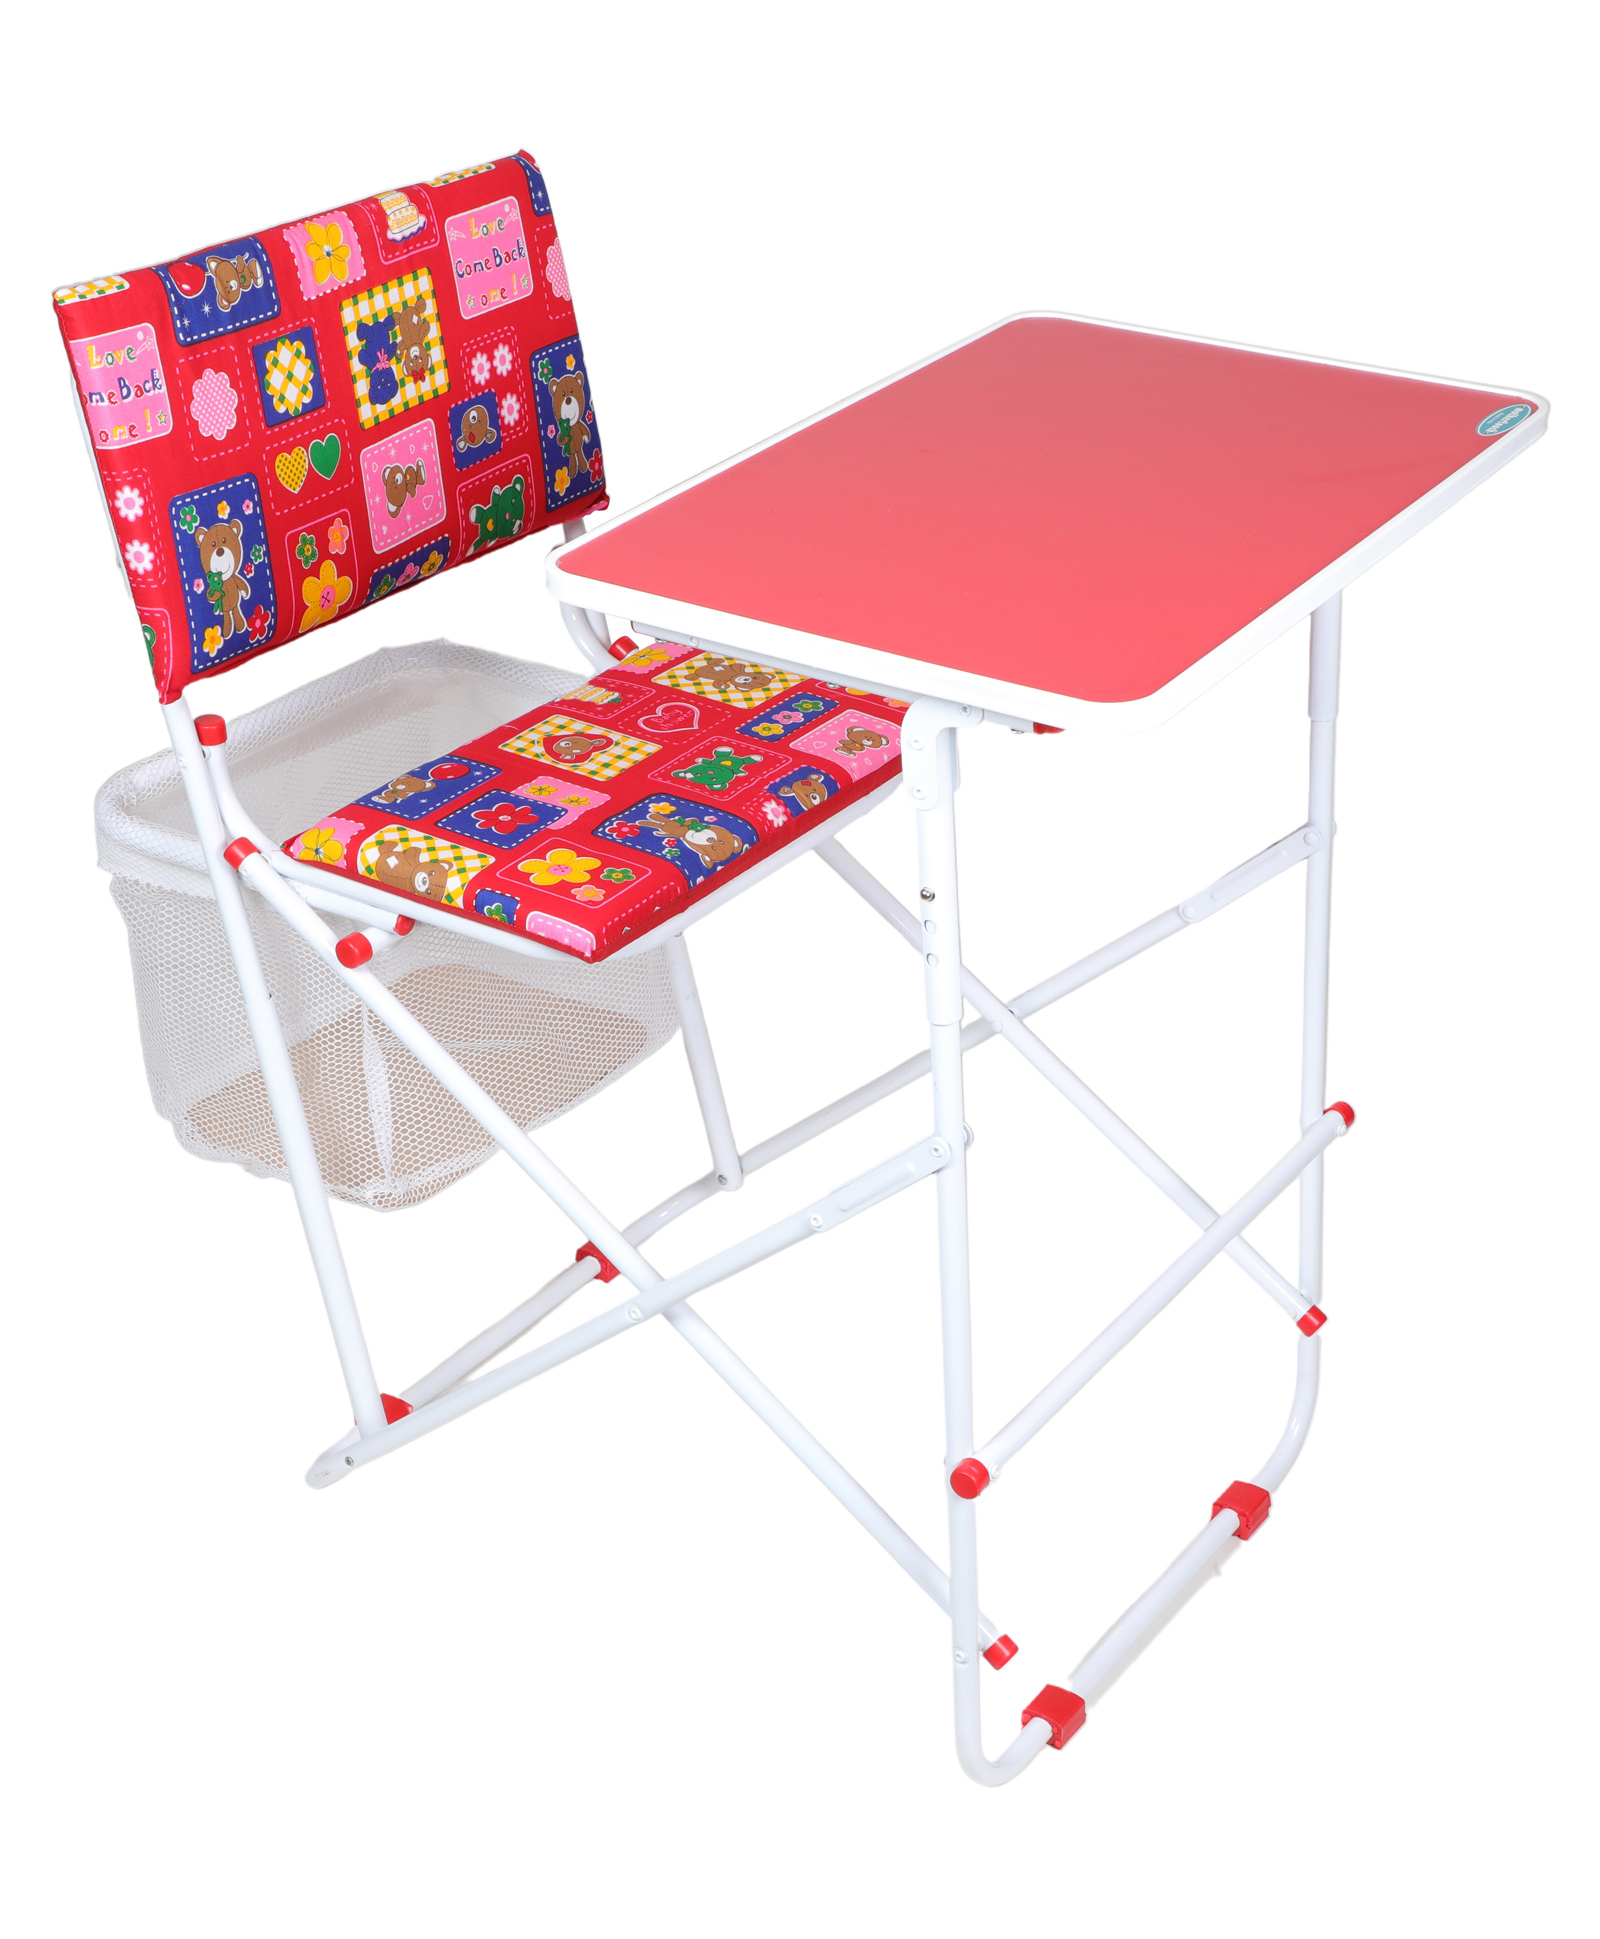 Mothertouch Educational Desk - Red Online in India, Buy at Best Price from   - 226068